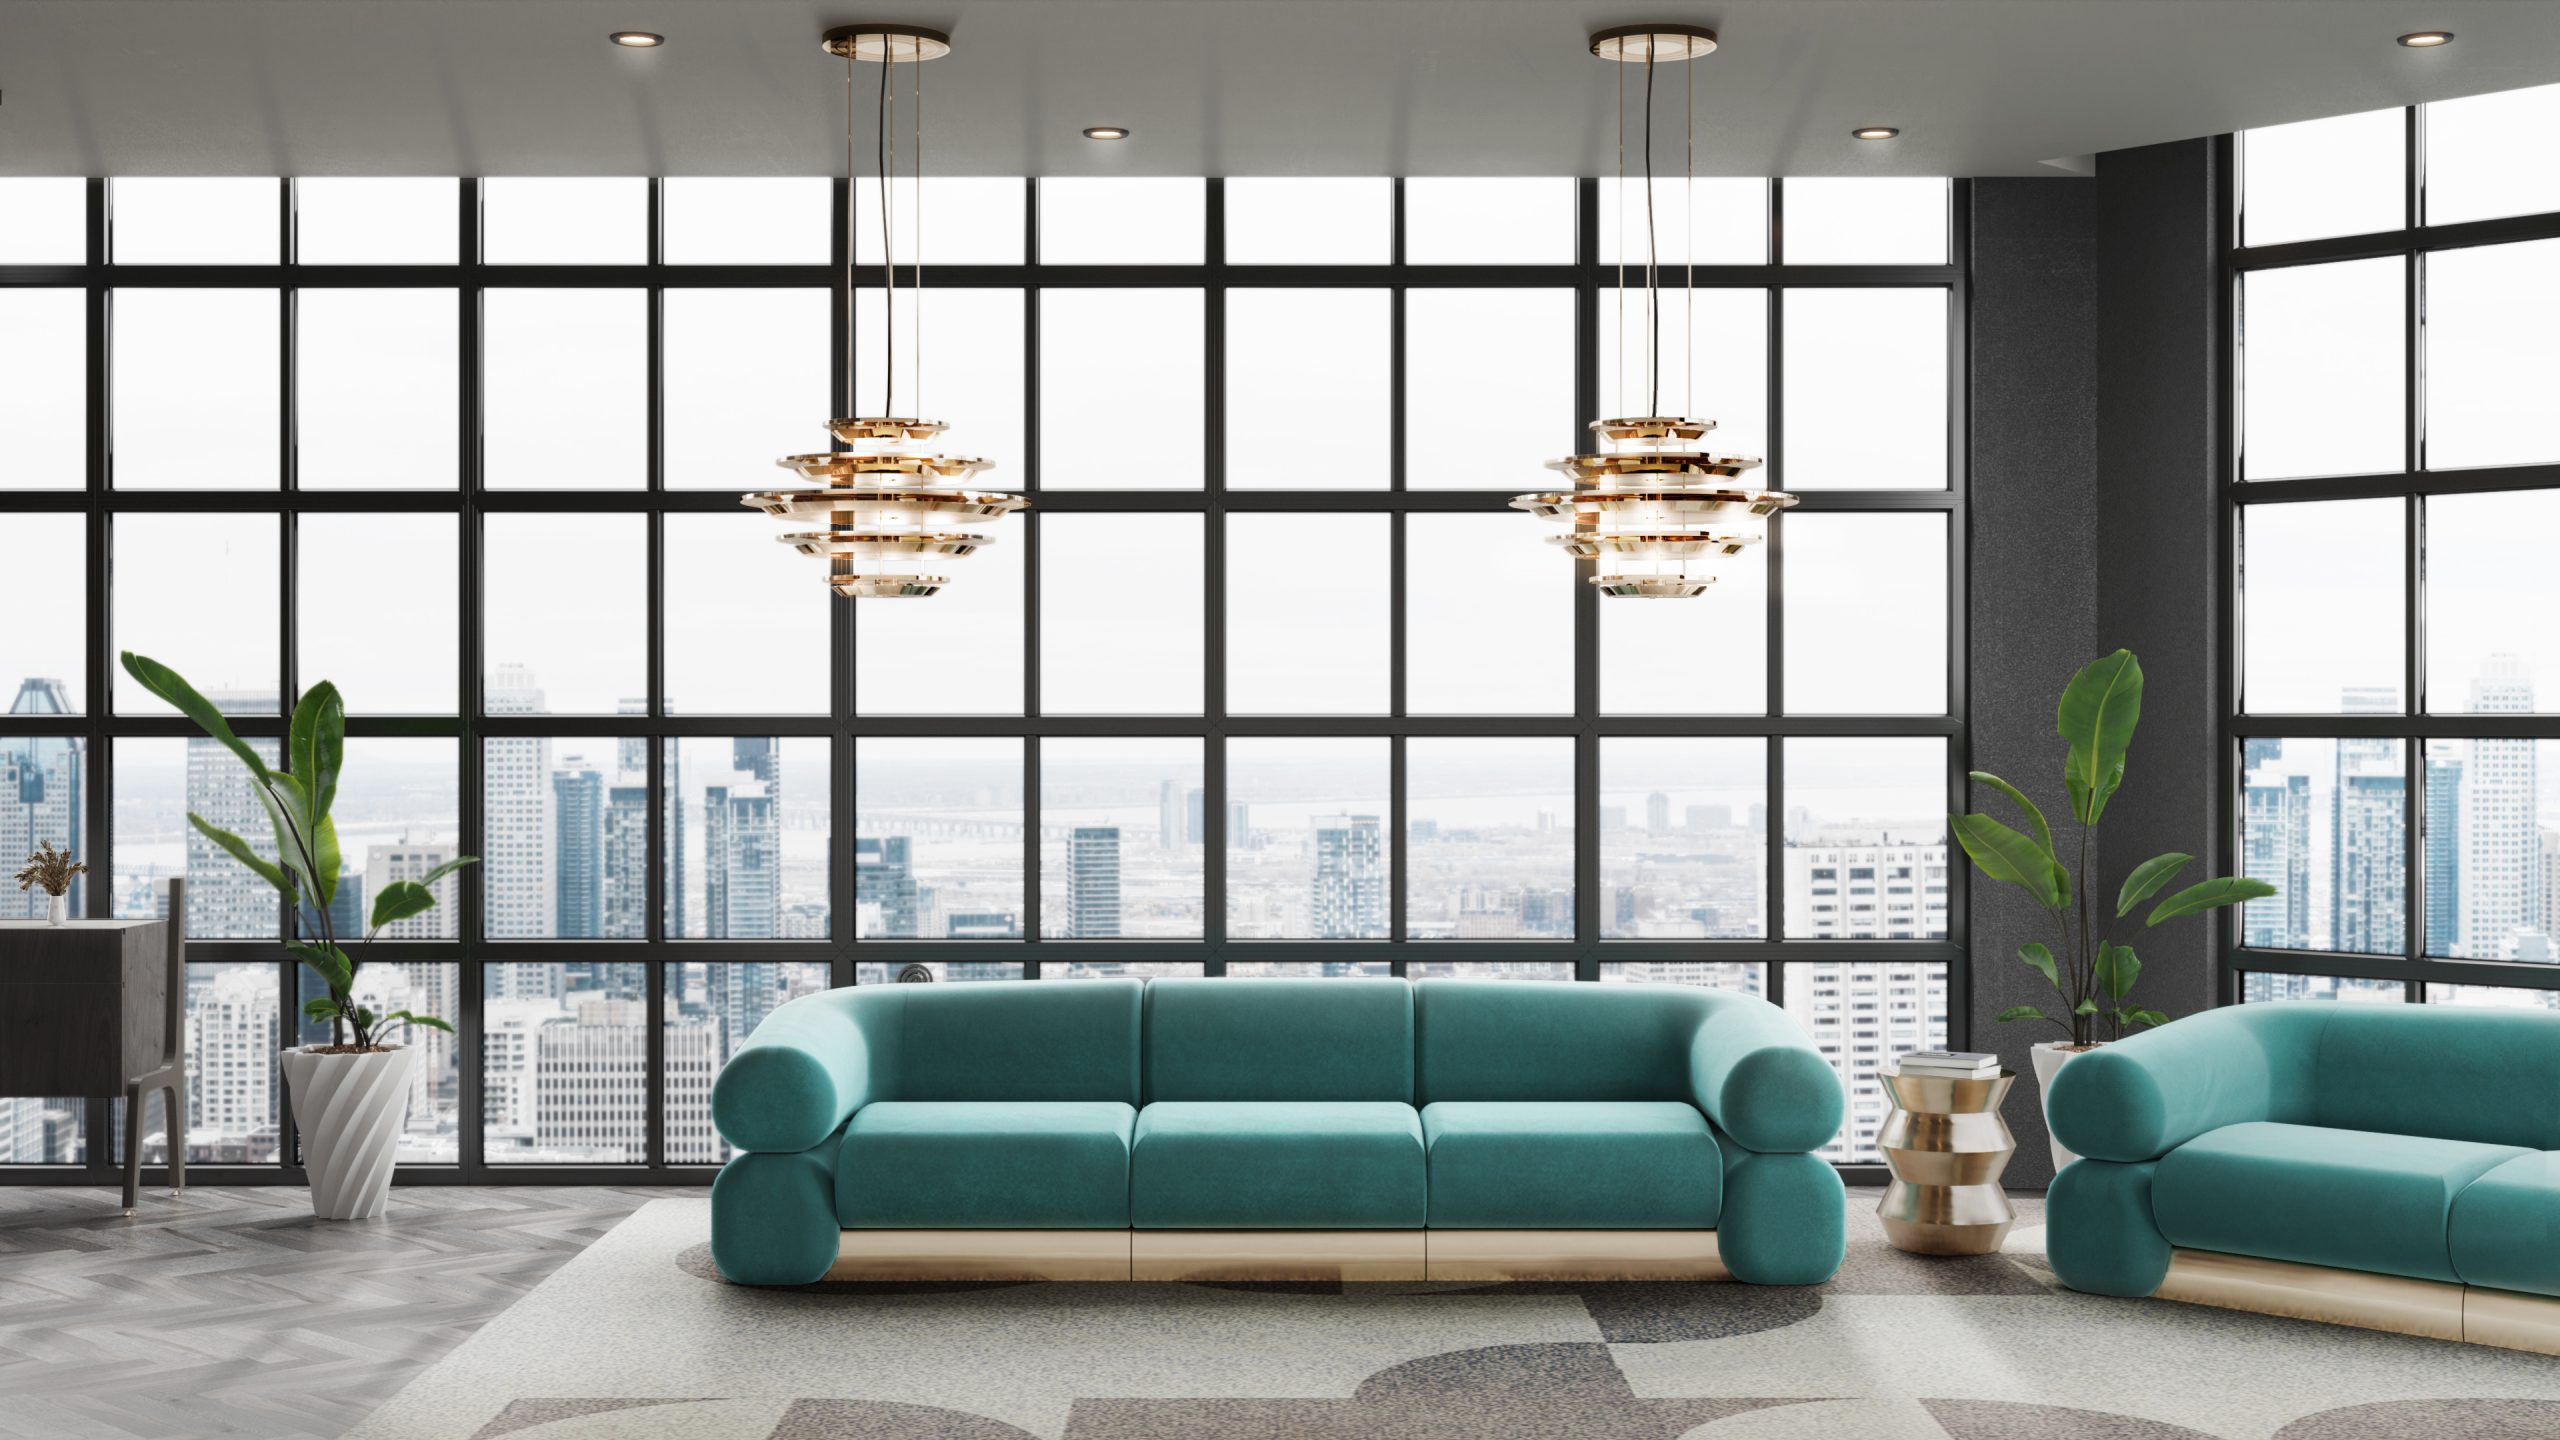 A MID-CENTURY MODERN LIVING ROOM WITH A CITY VIEW